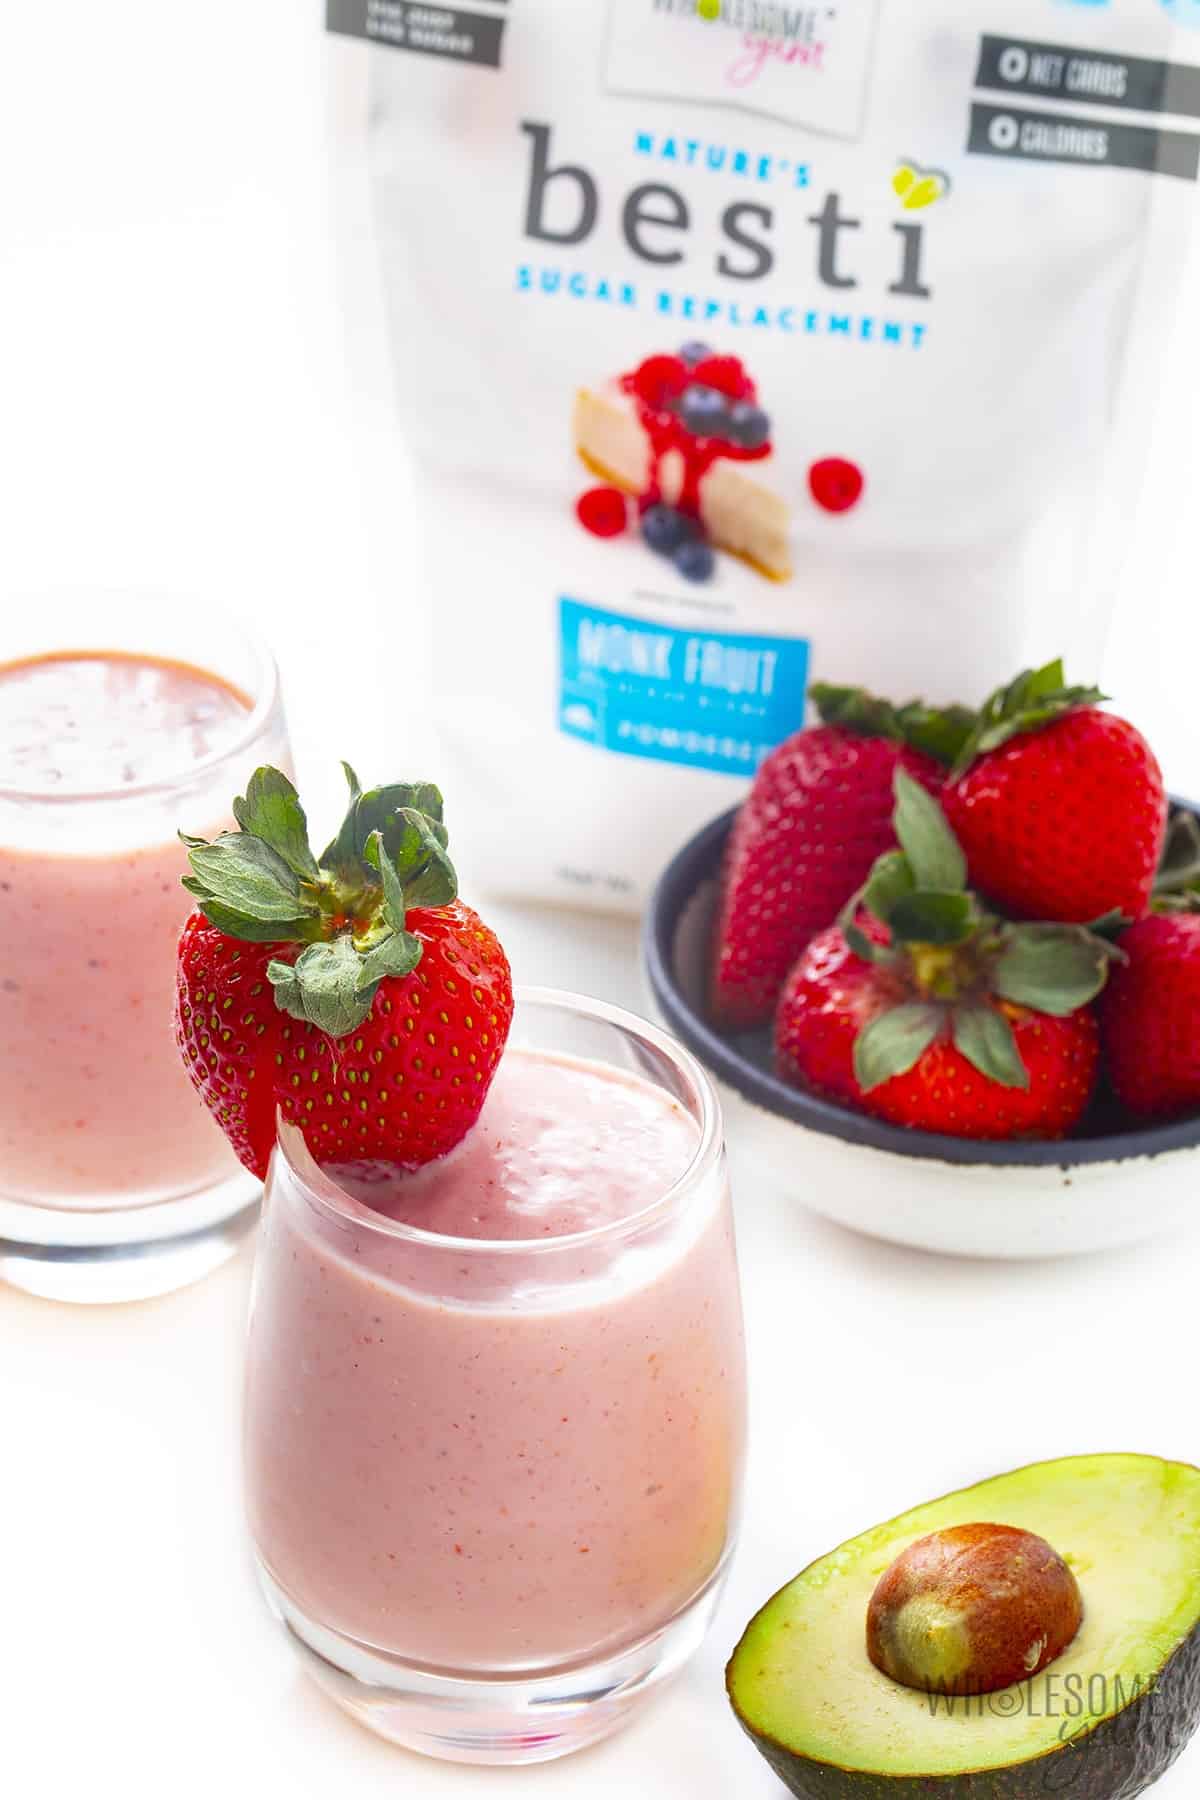 Strawberry Avocado Smoothie with Almond Milk  - weight loss